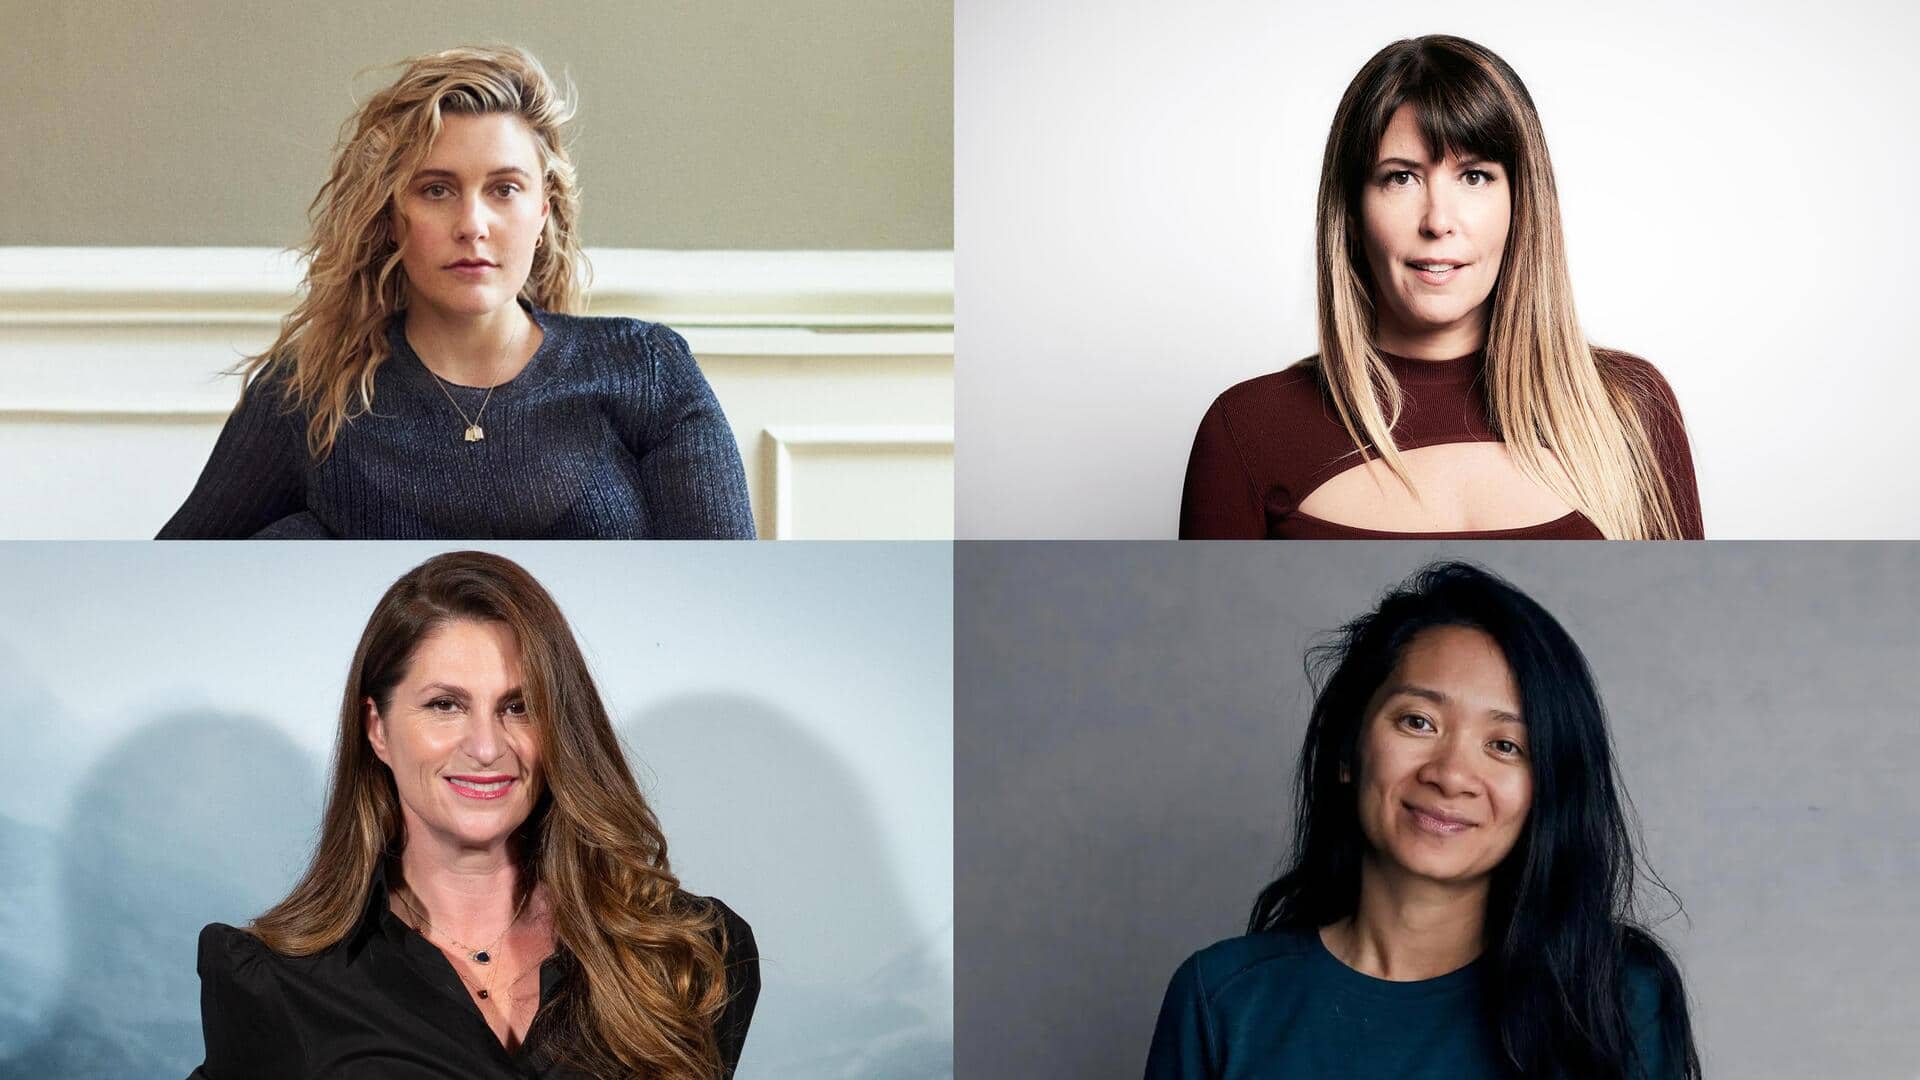 Top 5 women filmmakers in Hollywood right now